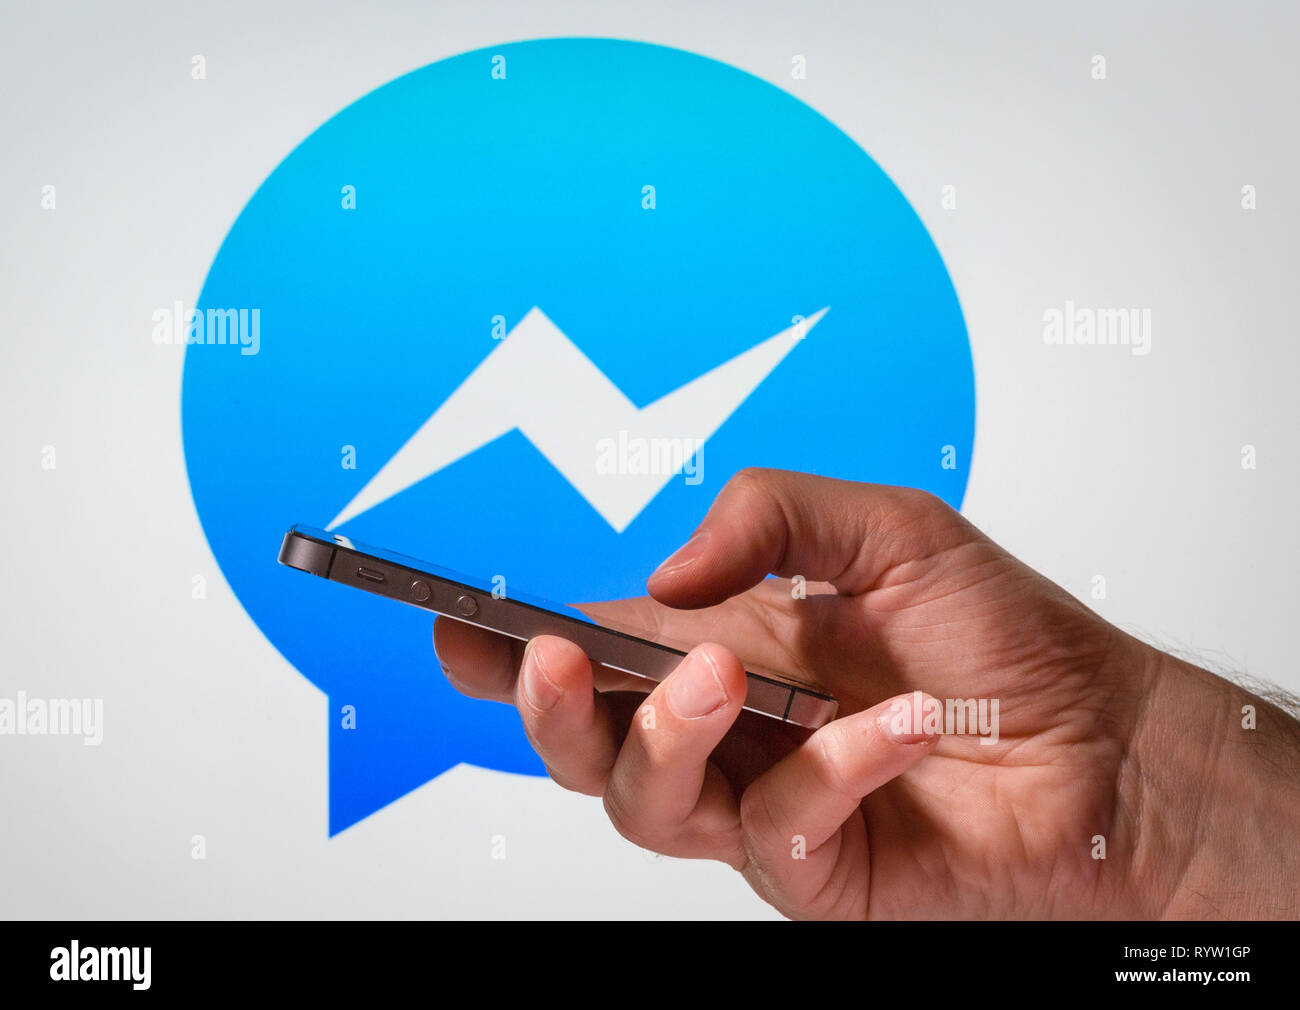 A man using Facebook Messenger app on his mobile phone Stock Photo